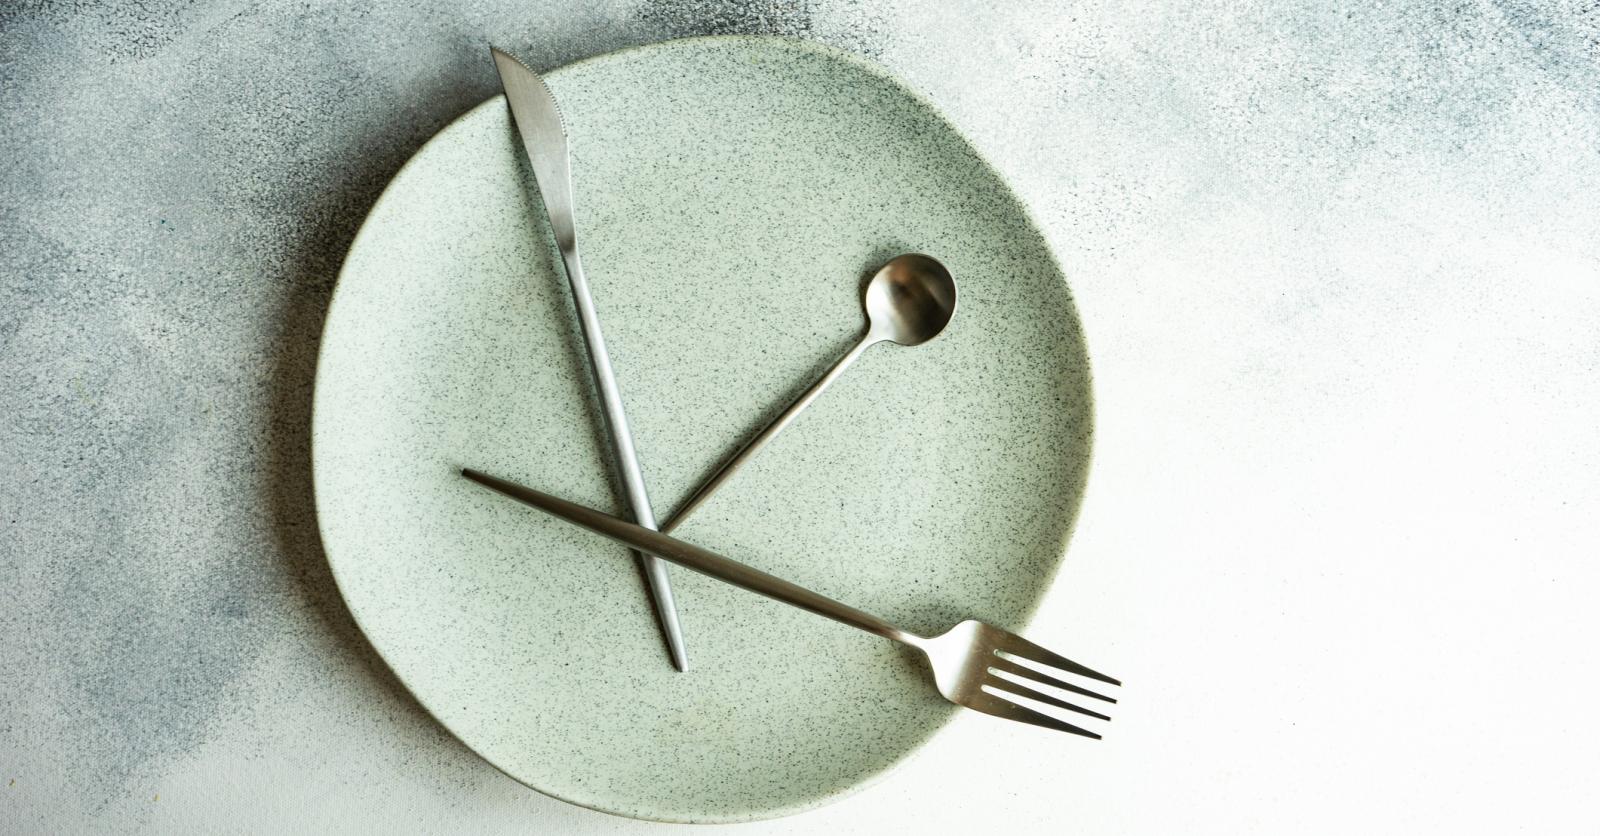 Is intermittent fasting dangerous?